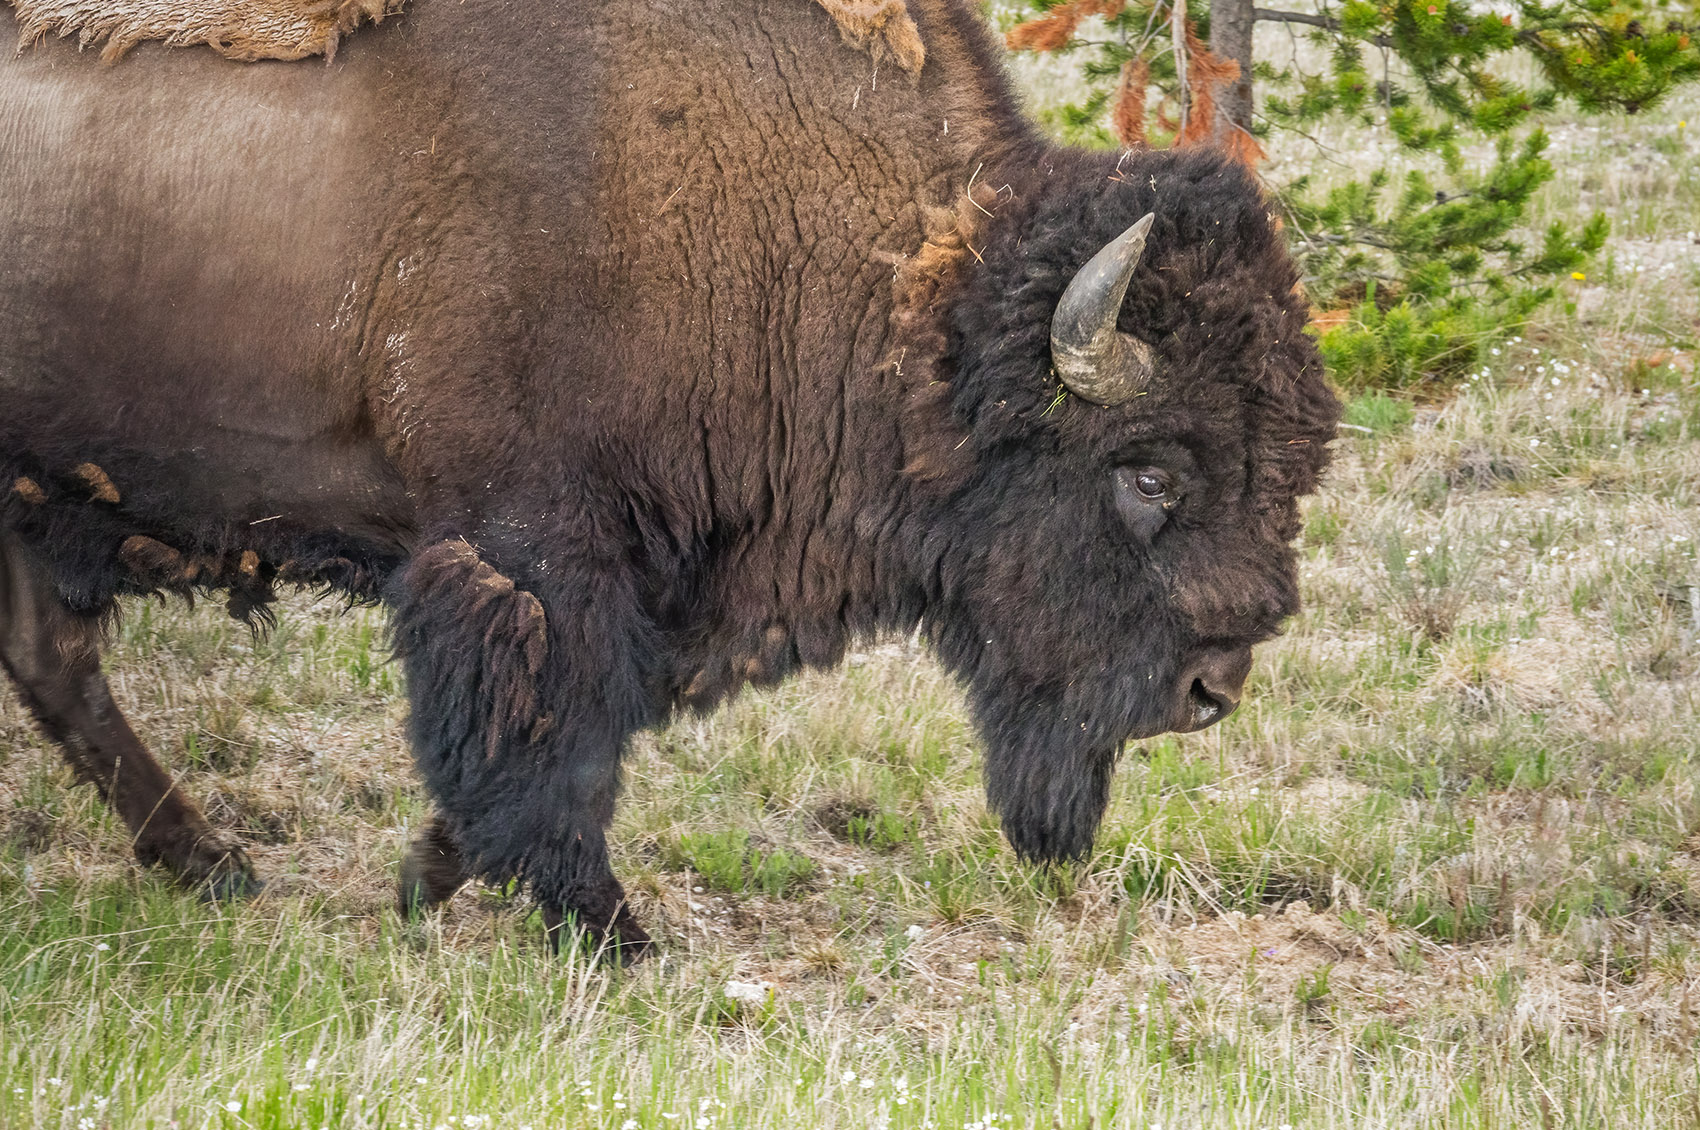 buffalo bison with horns on grass